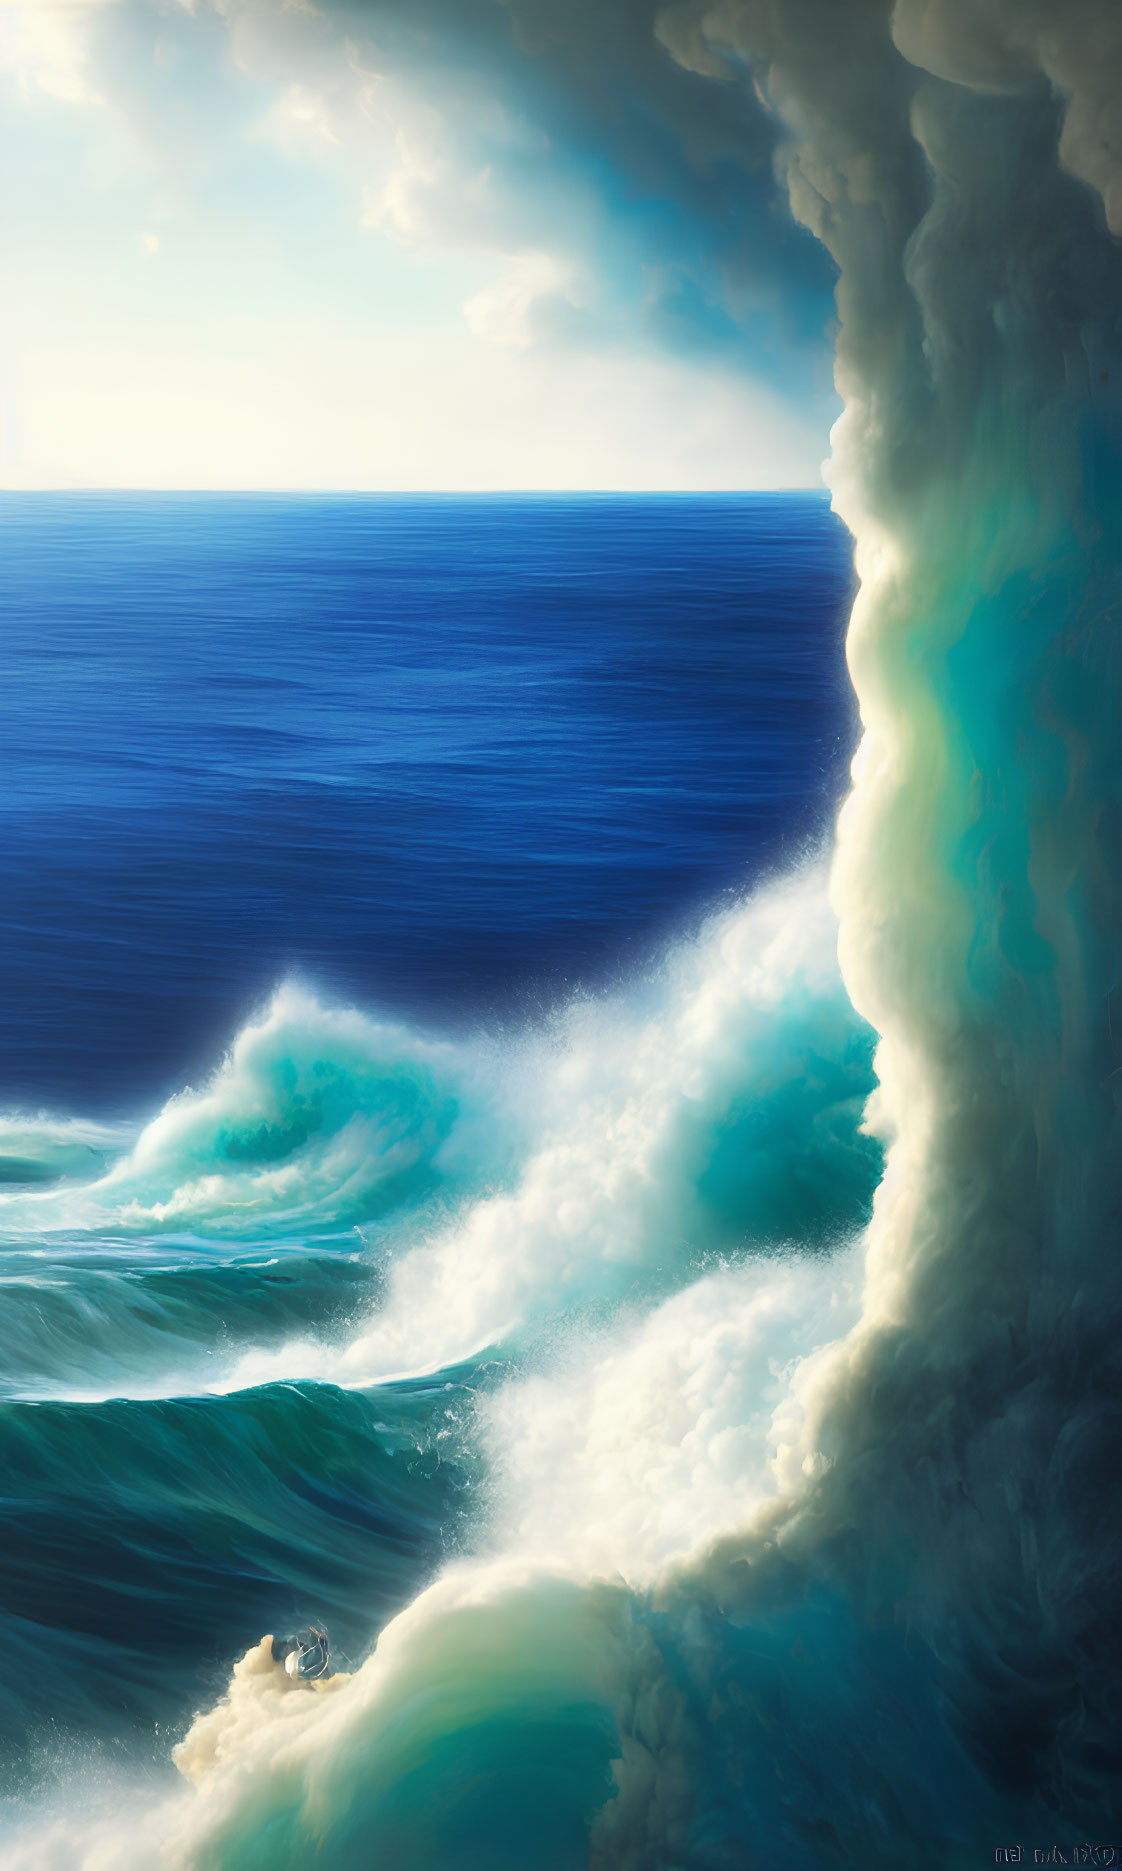 Dramatic ocean scene with towering waves crashing against cliff